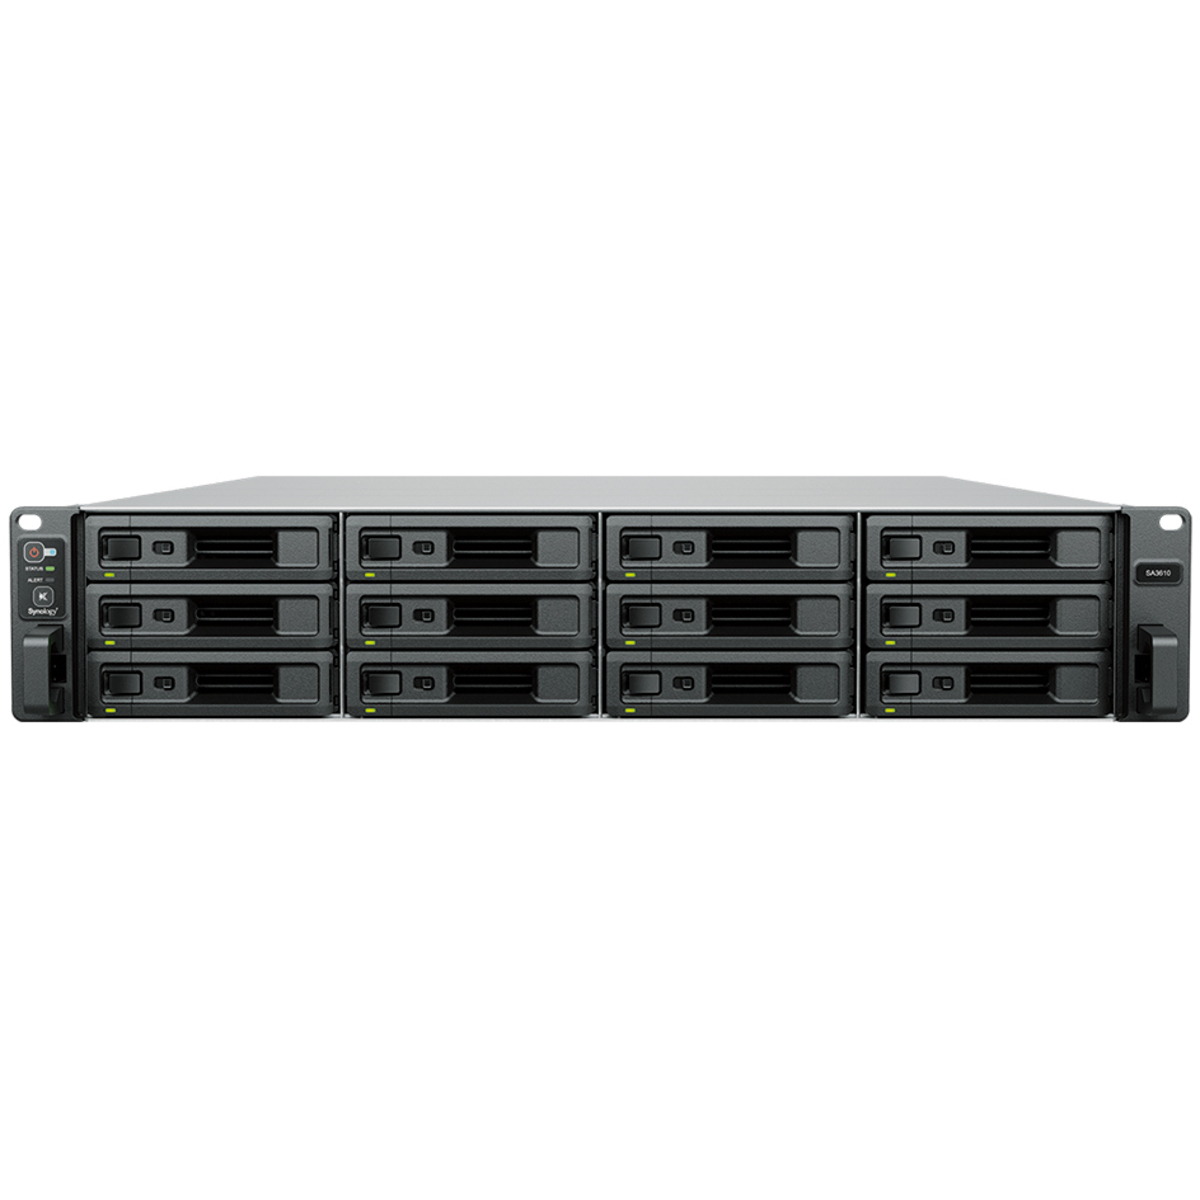 Synology RackStation SA3410 176tb 12-Bay RackMount Large Business / Enterprise NAS - Network Attached Storage Device 11x16tb Seagate IronWolf Pro ST16000NT001 3.5 7200rpm SATA 6Gb/s HDD NAS Class Drives Installed - Burn-In Tested - ON SALE RackStation SA3410